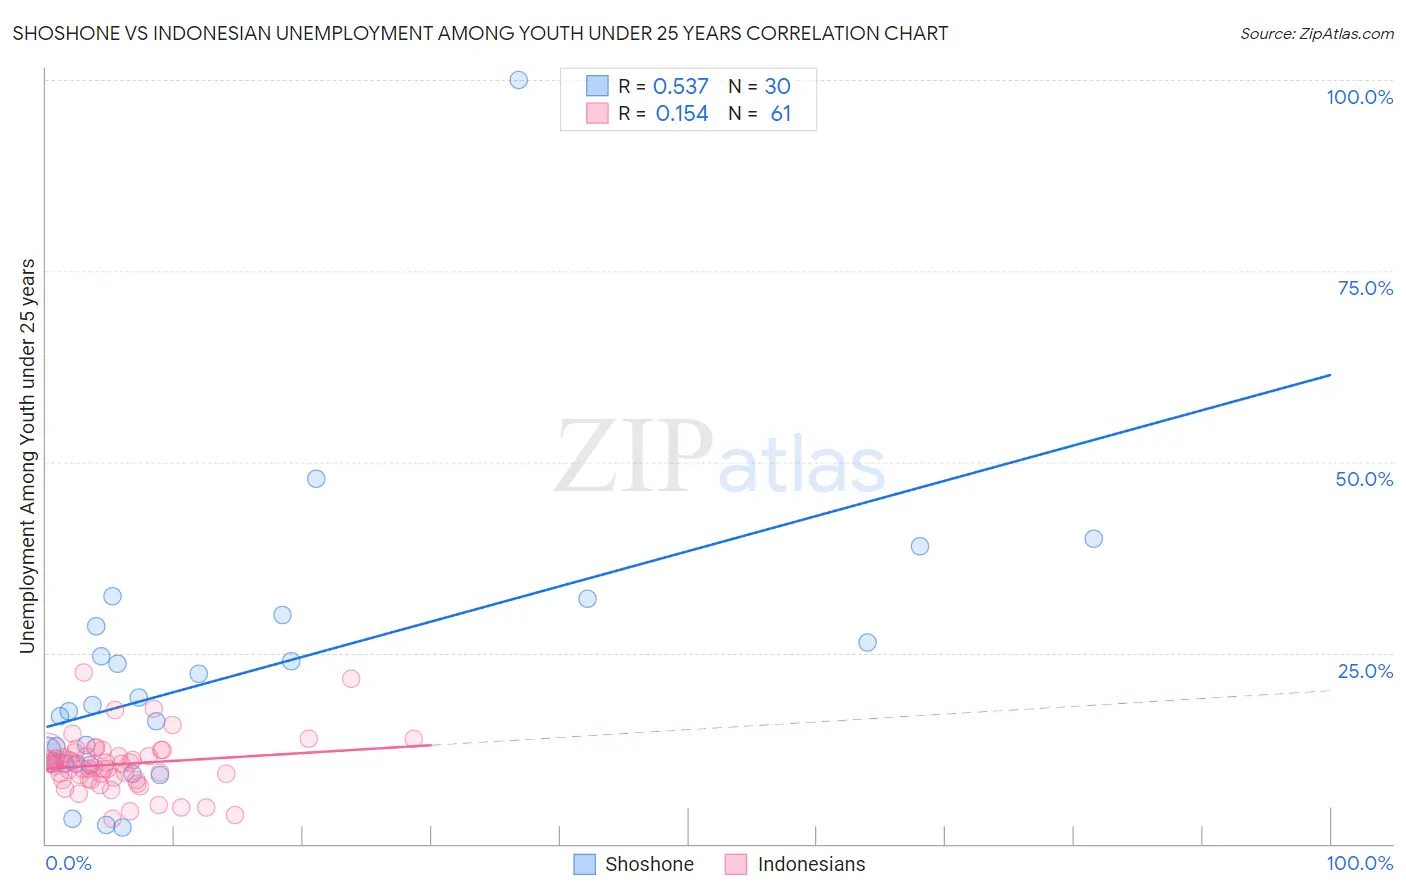 Shoshone vs Indonesian Unemployment Among Youth under 25 years